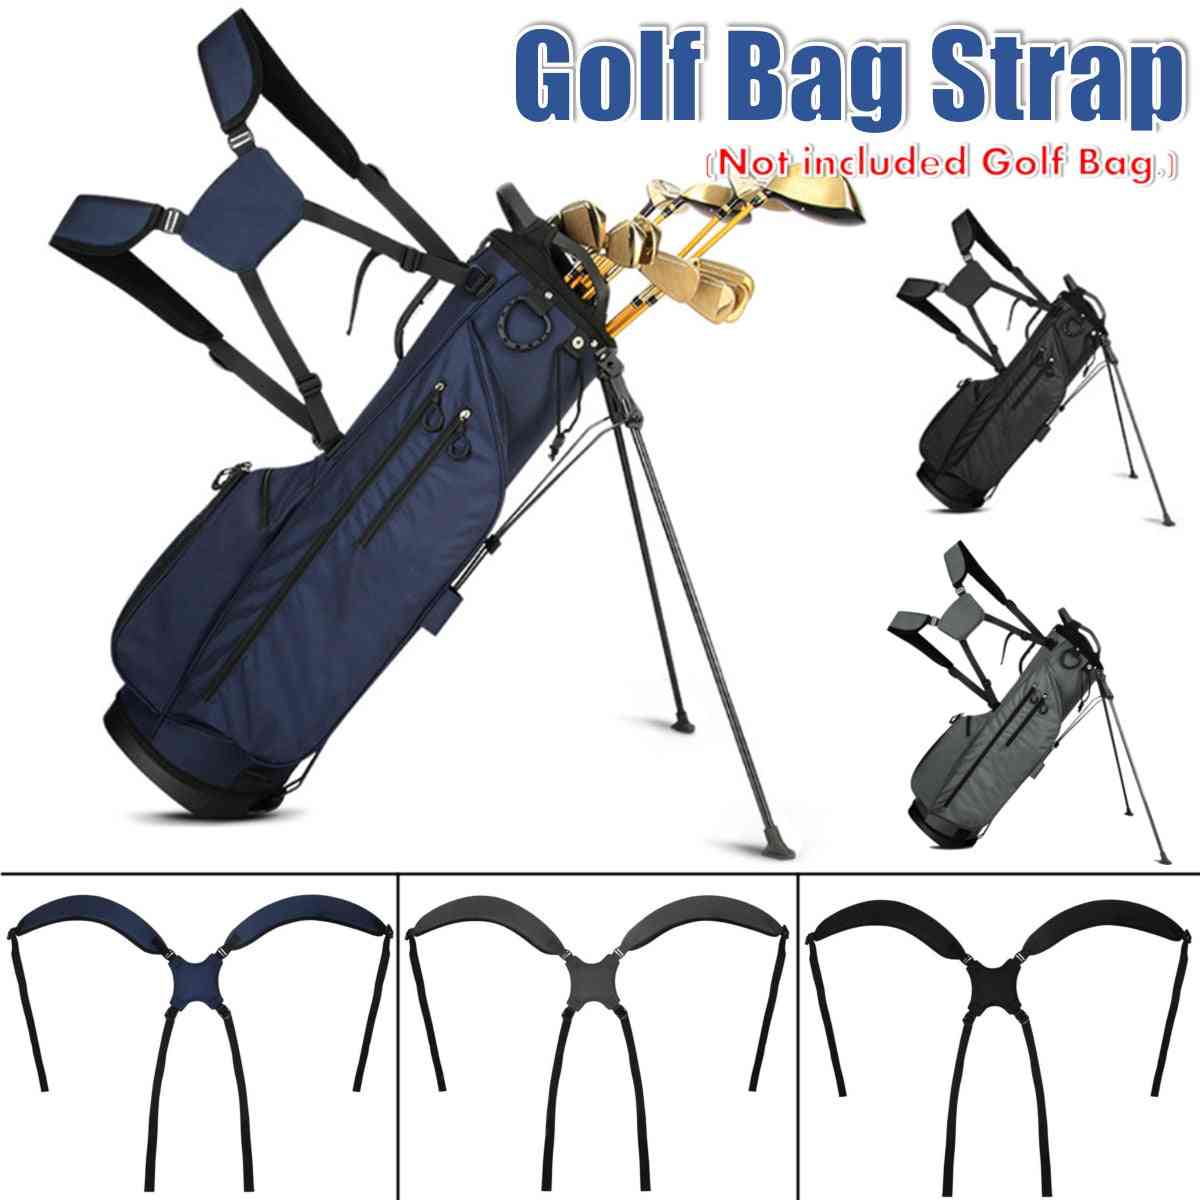 Golf Shoulder Strap Padded For Carry Bag, Foldable/ Adjustable/ Replacement Accessories